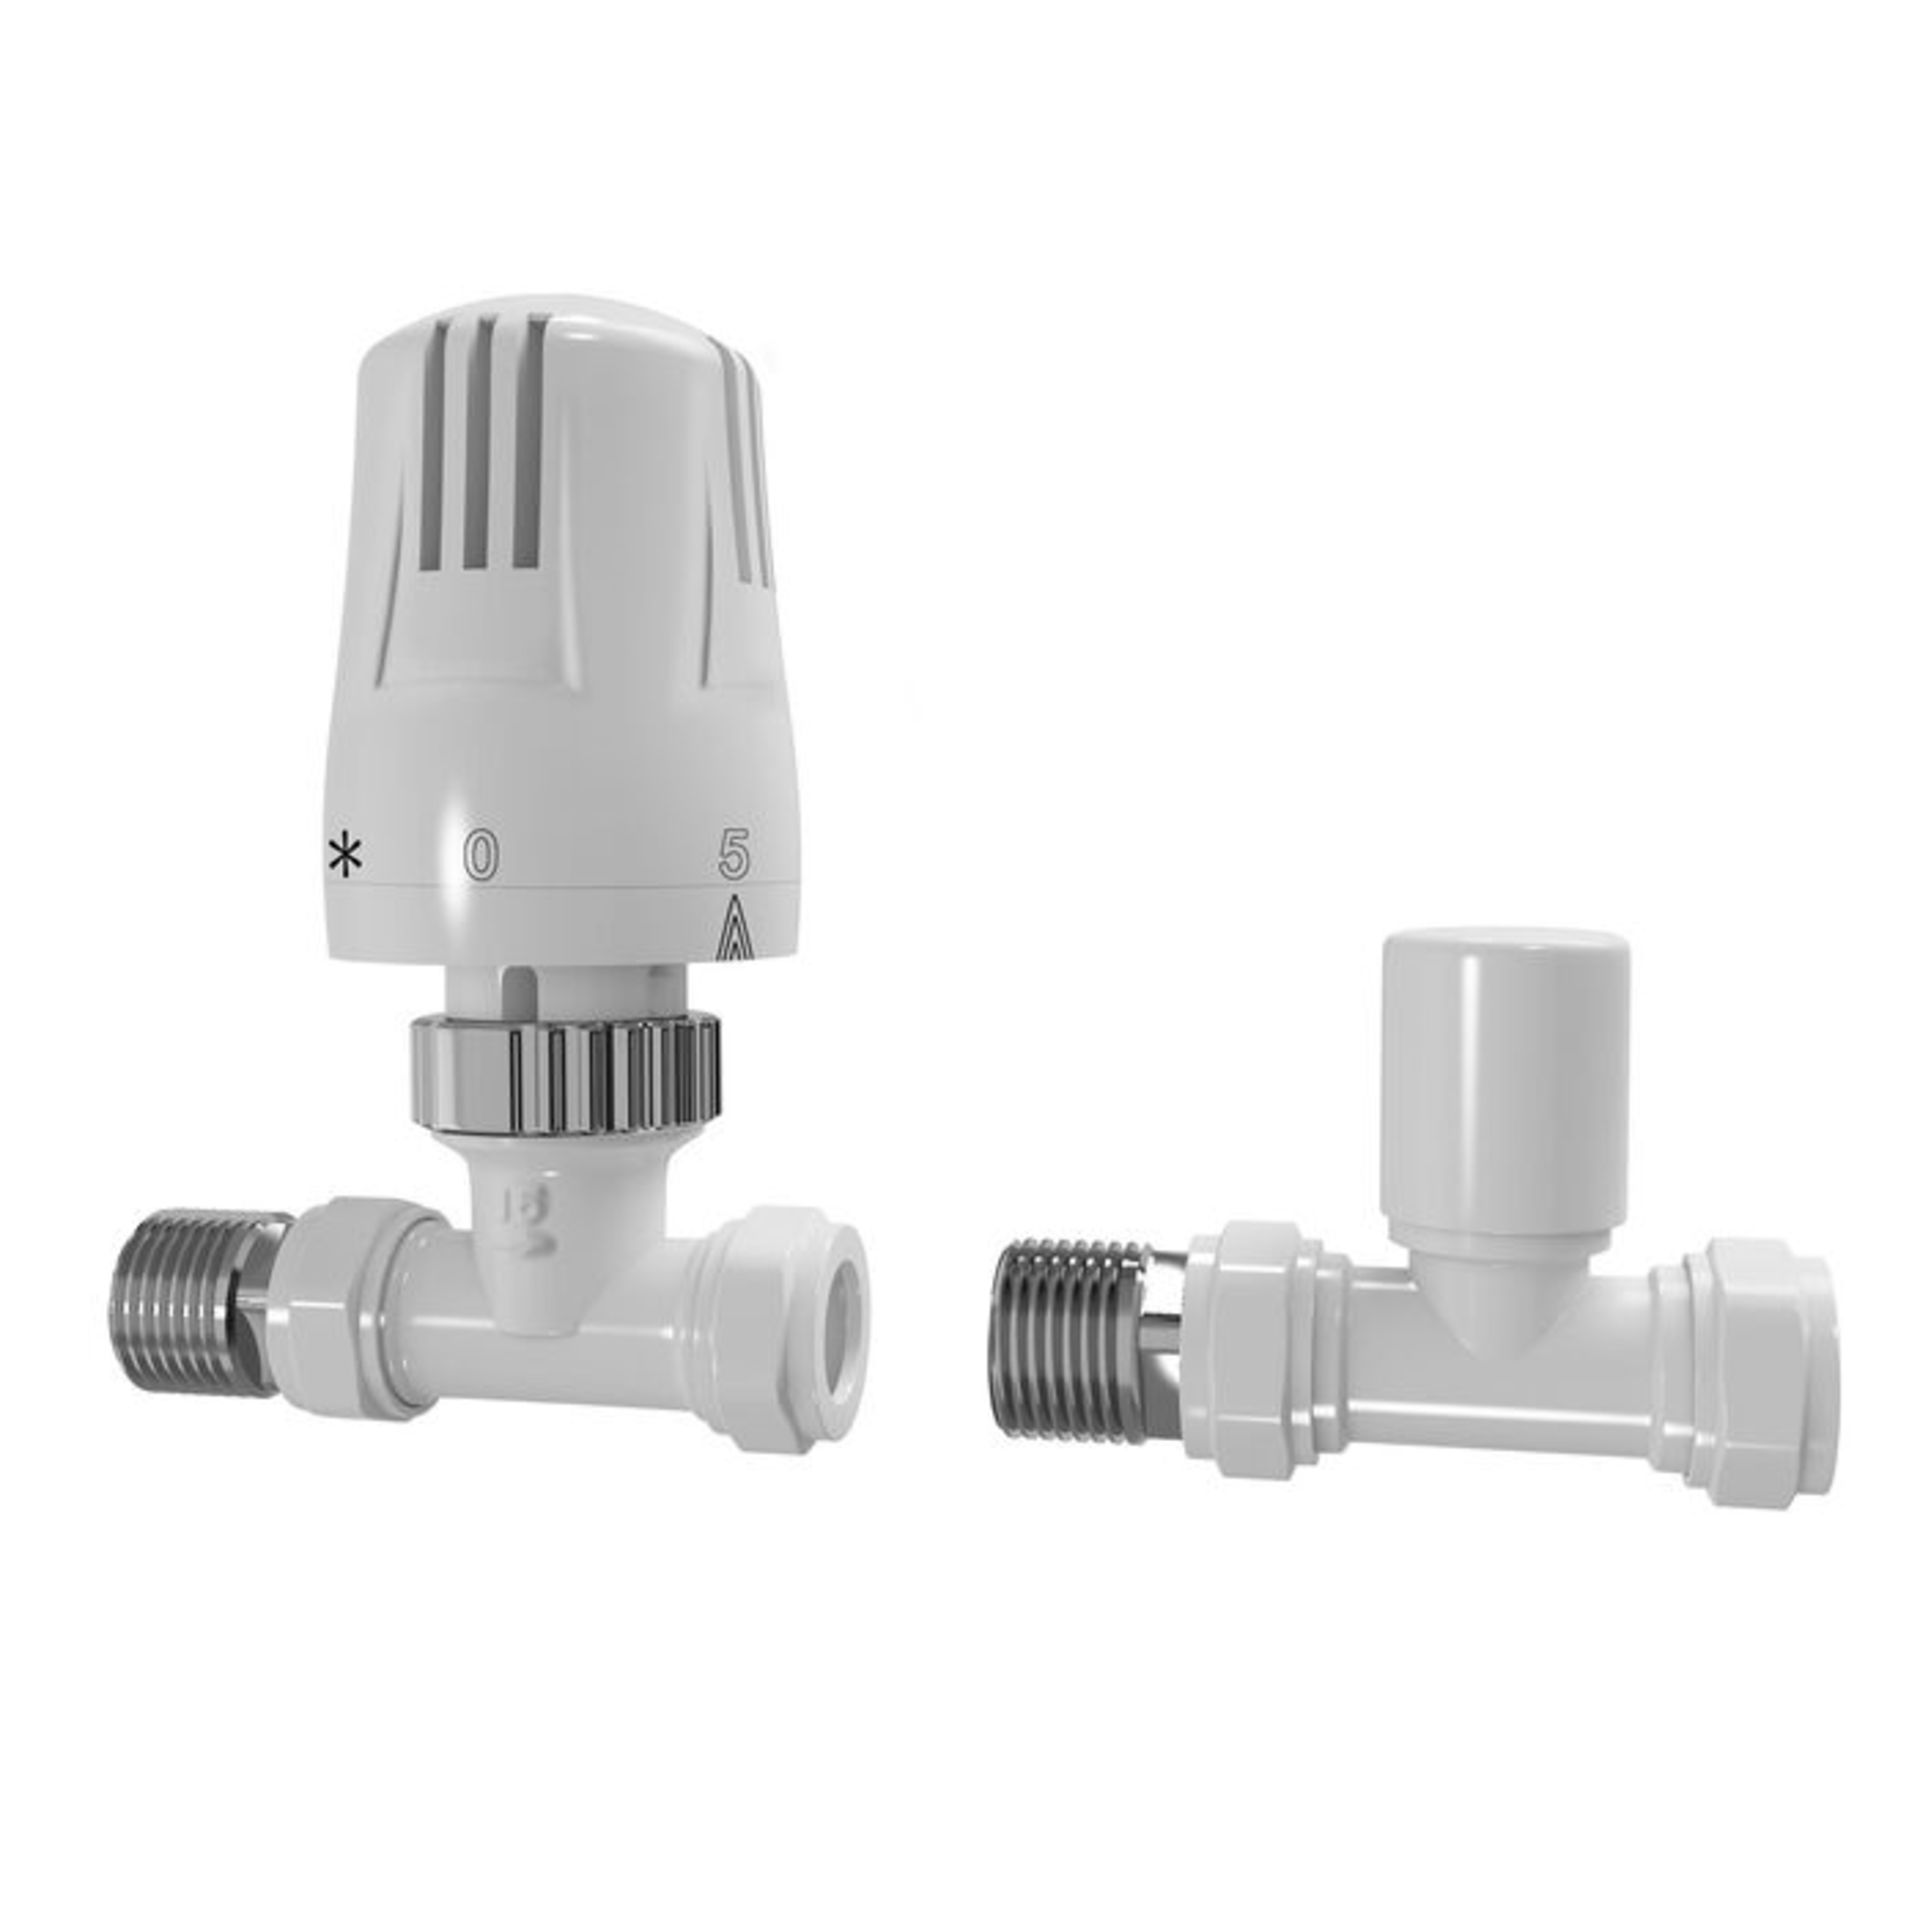 (FF1004) 15mm Standard Connection Thermostatic Straight Gloss White Radiator Valves Solid bras... - Image 3 of 3